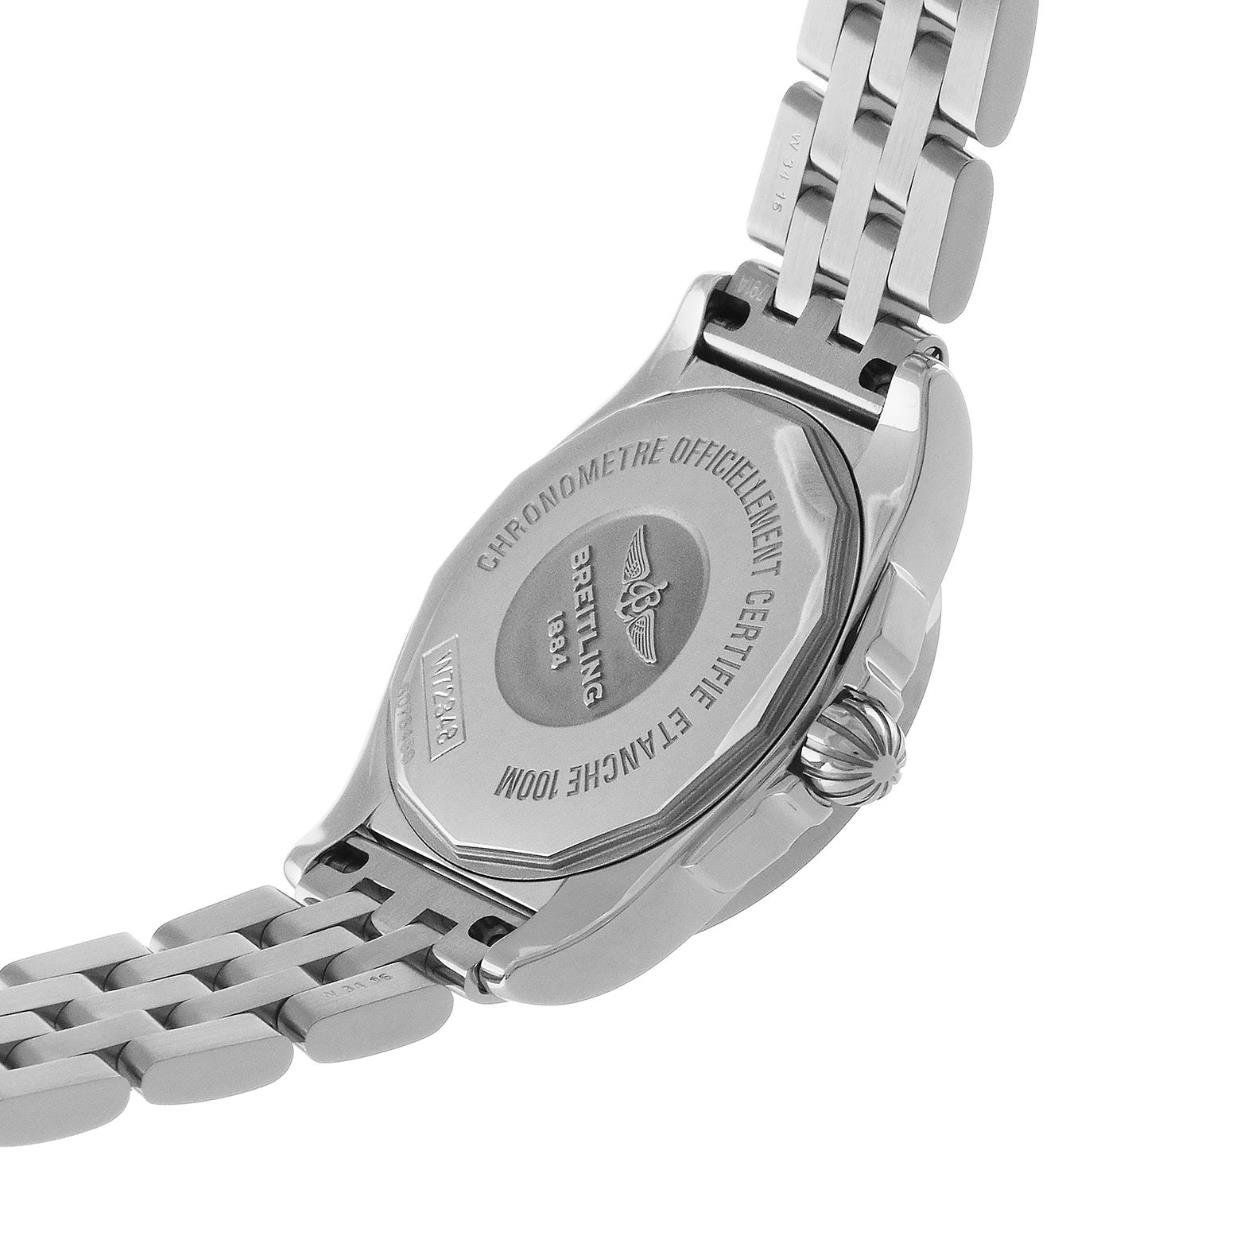 The 29mm fake watch is made from stainless steel.